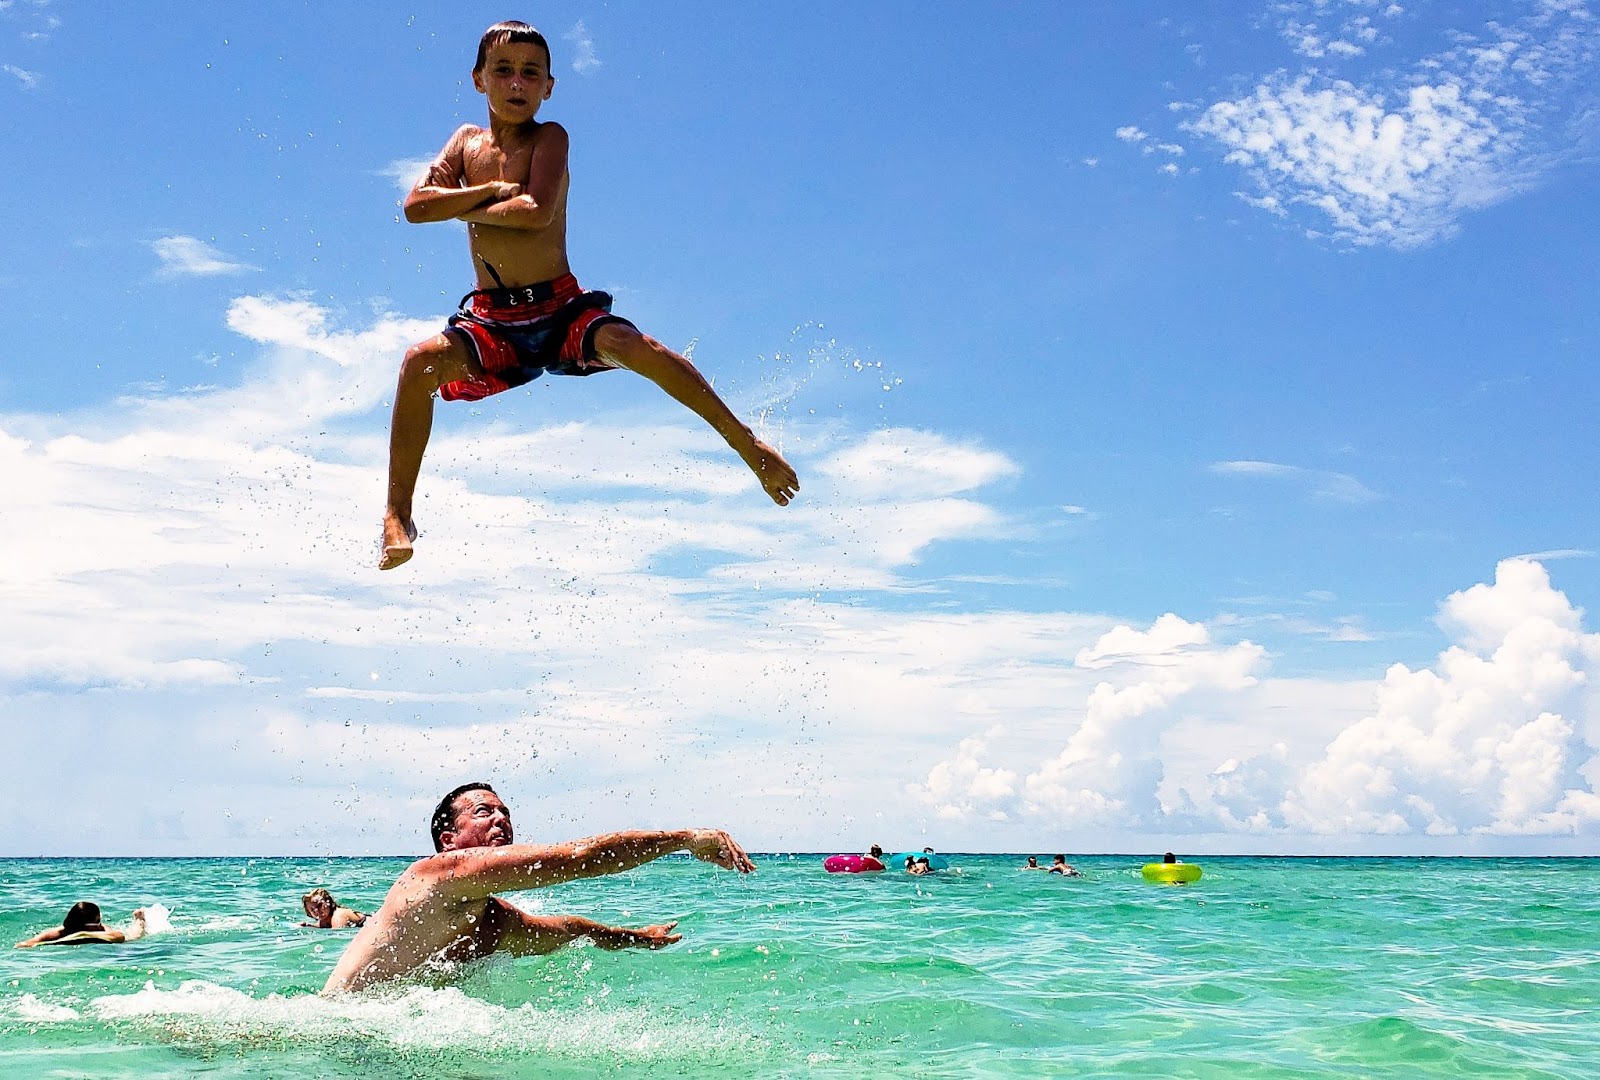 A kid poses a funny angle after his dad throws him in the air.